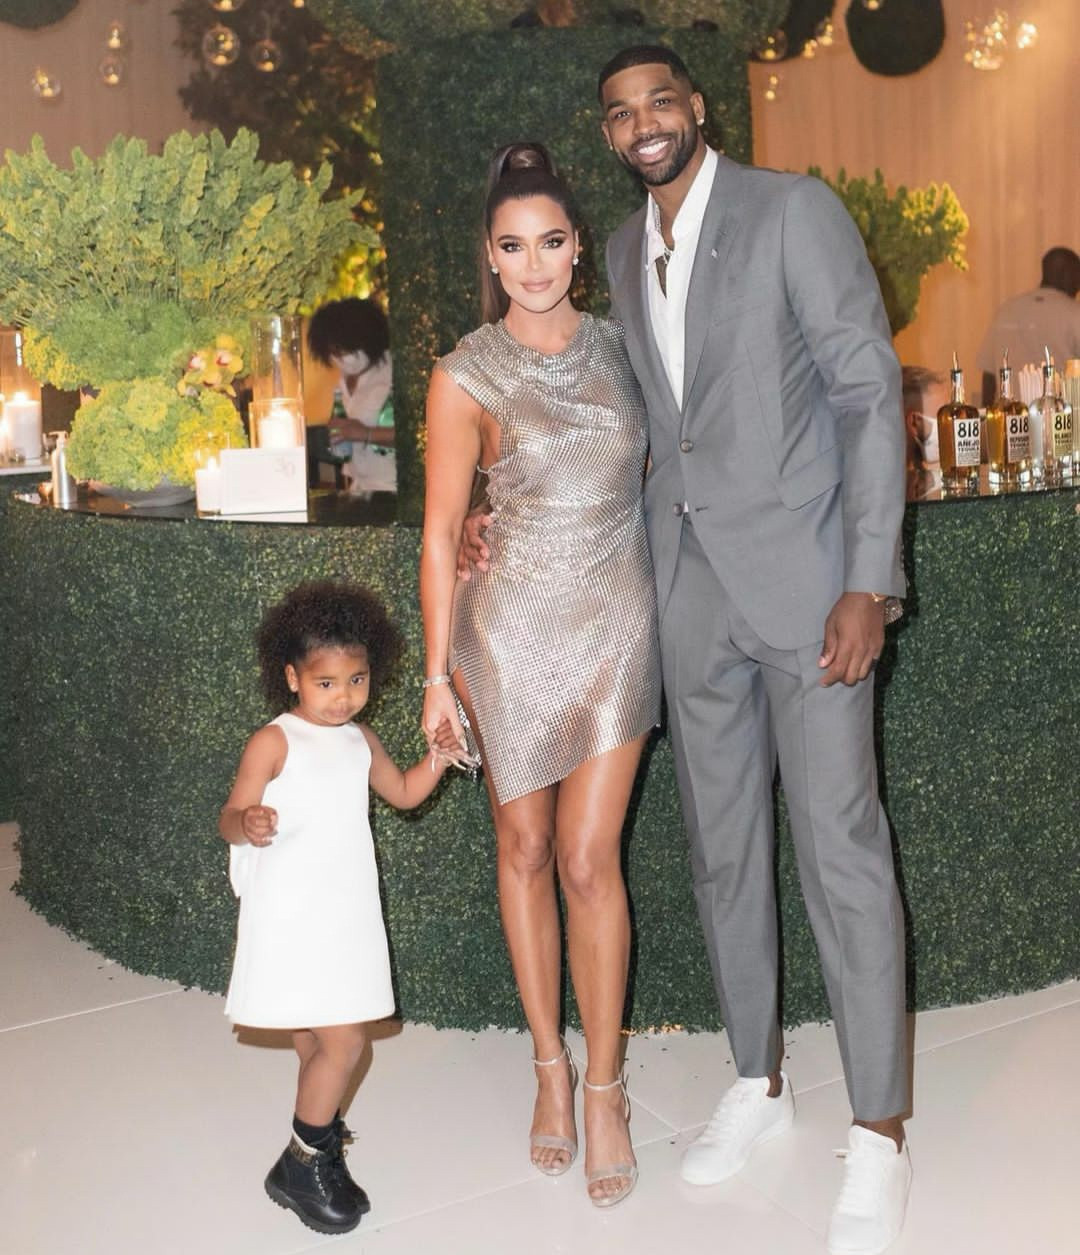 Khloe Kardashian pens beautiful birthday message to her rumoured fiancee and baby daddy, Tristan Thompson